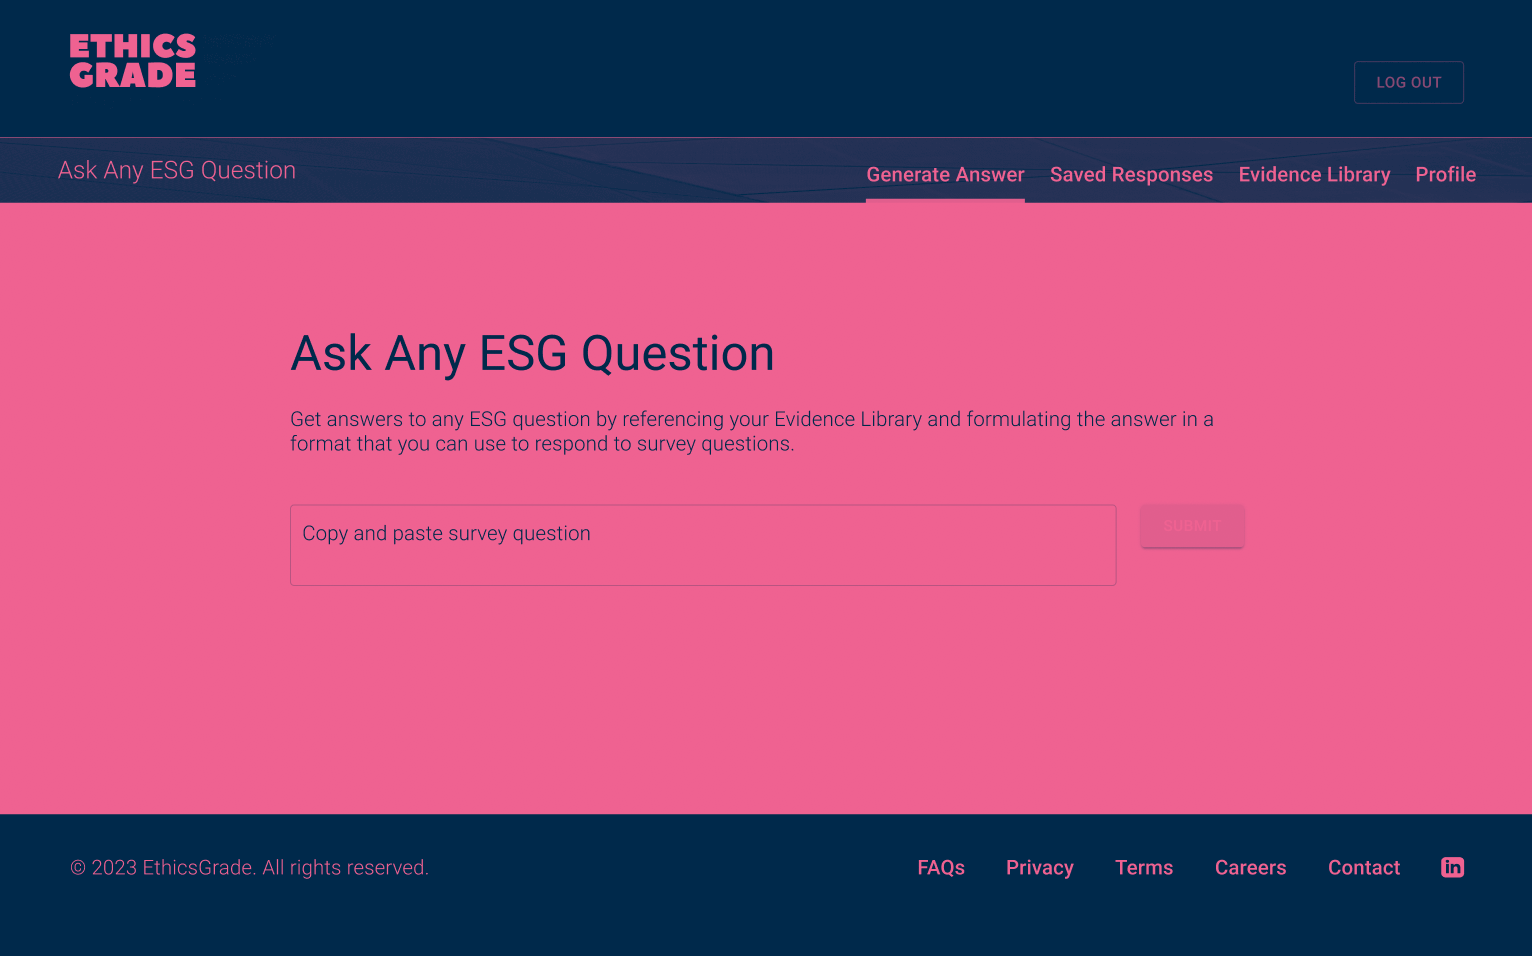 Ask any ESG question